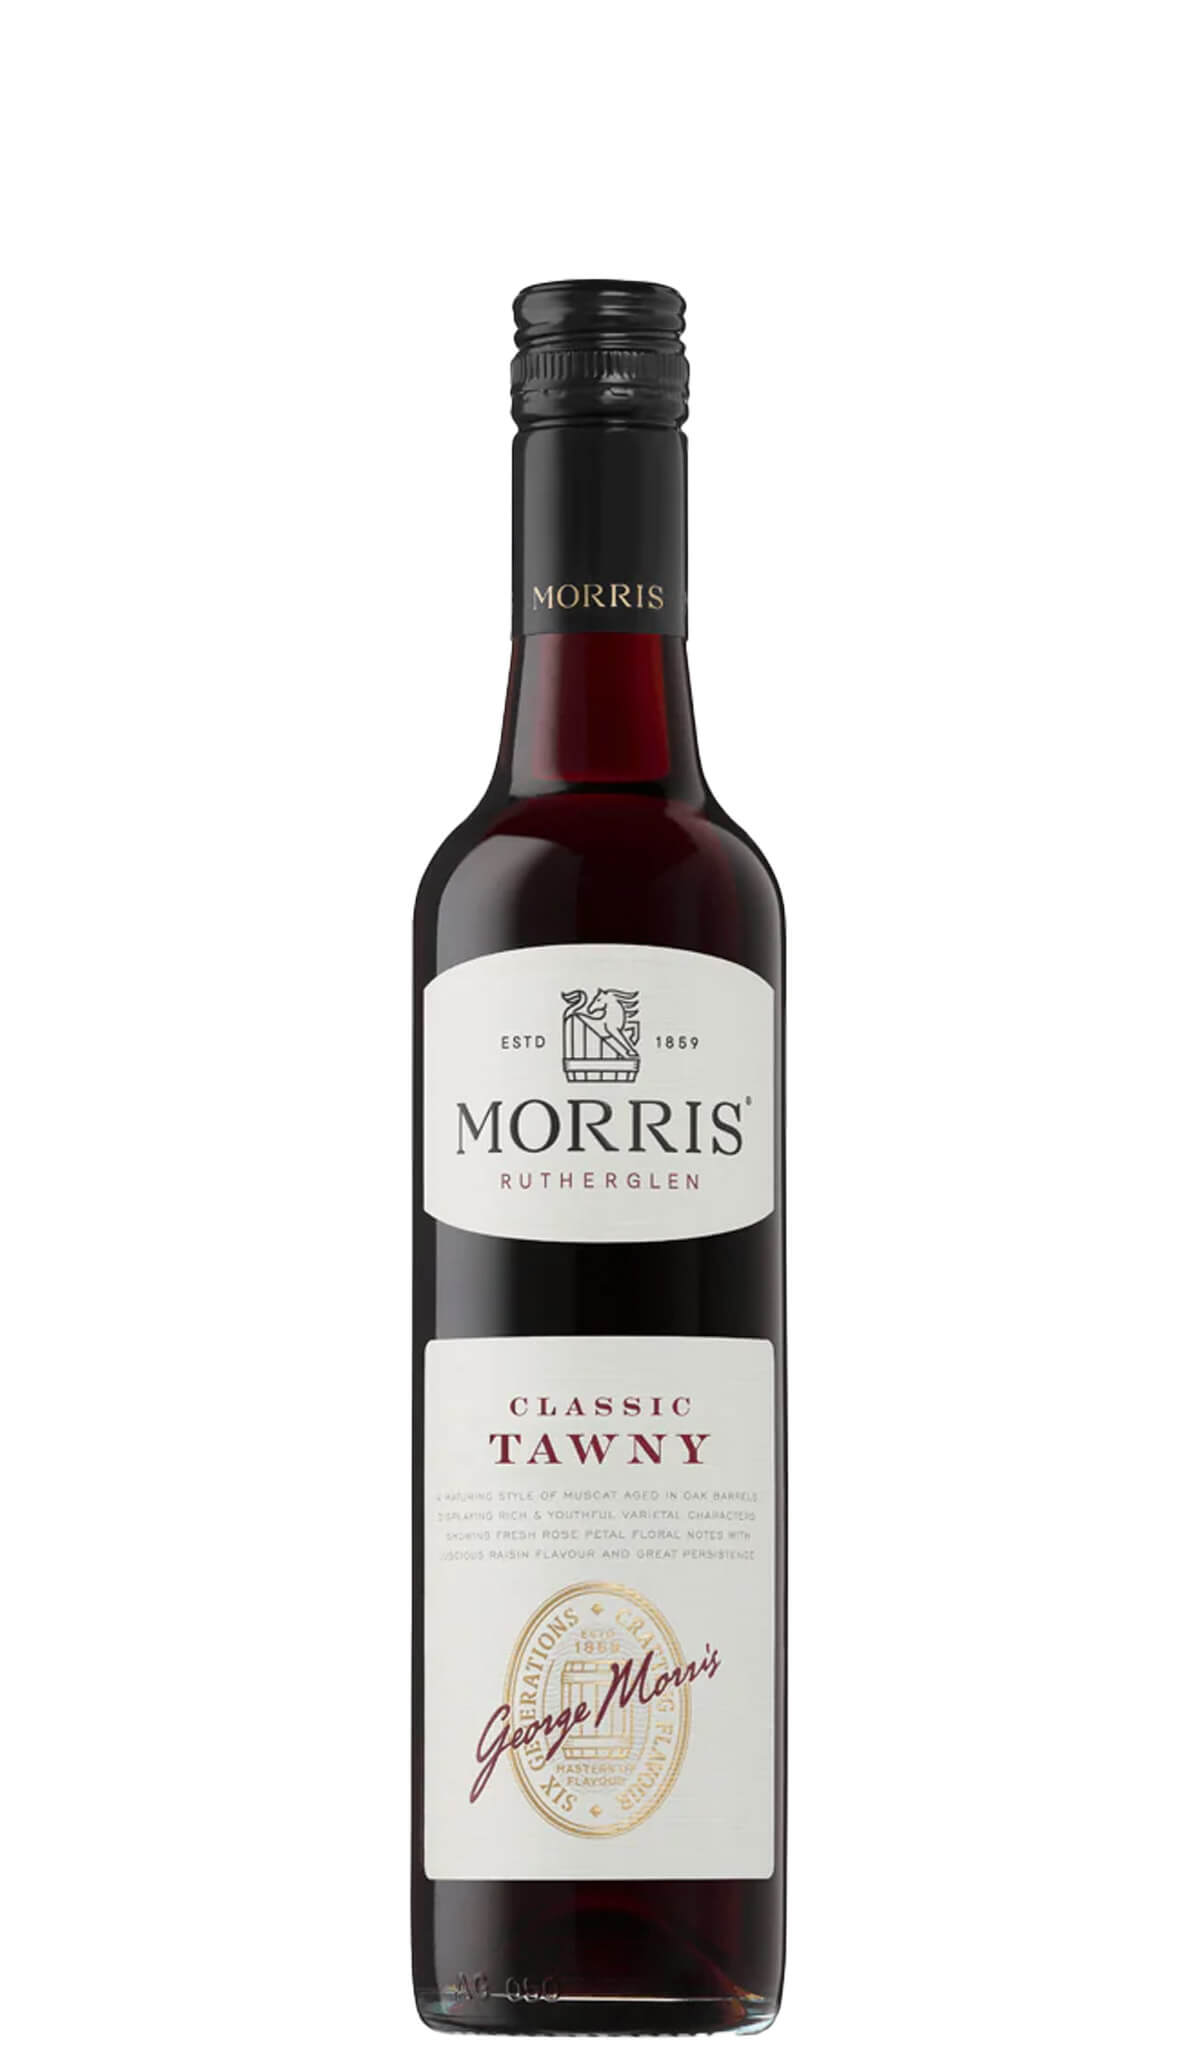 Find out more or buy Morris of Rutherglen Classic Tawny Liqueur 500ml online at Wine Sellers Direct - Australia’s independent liquor specialists.